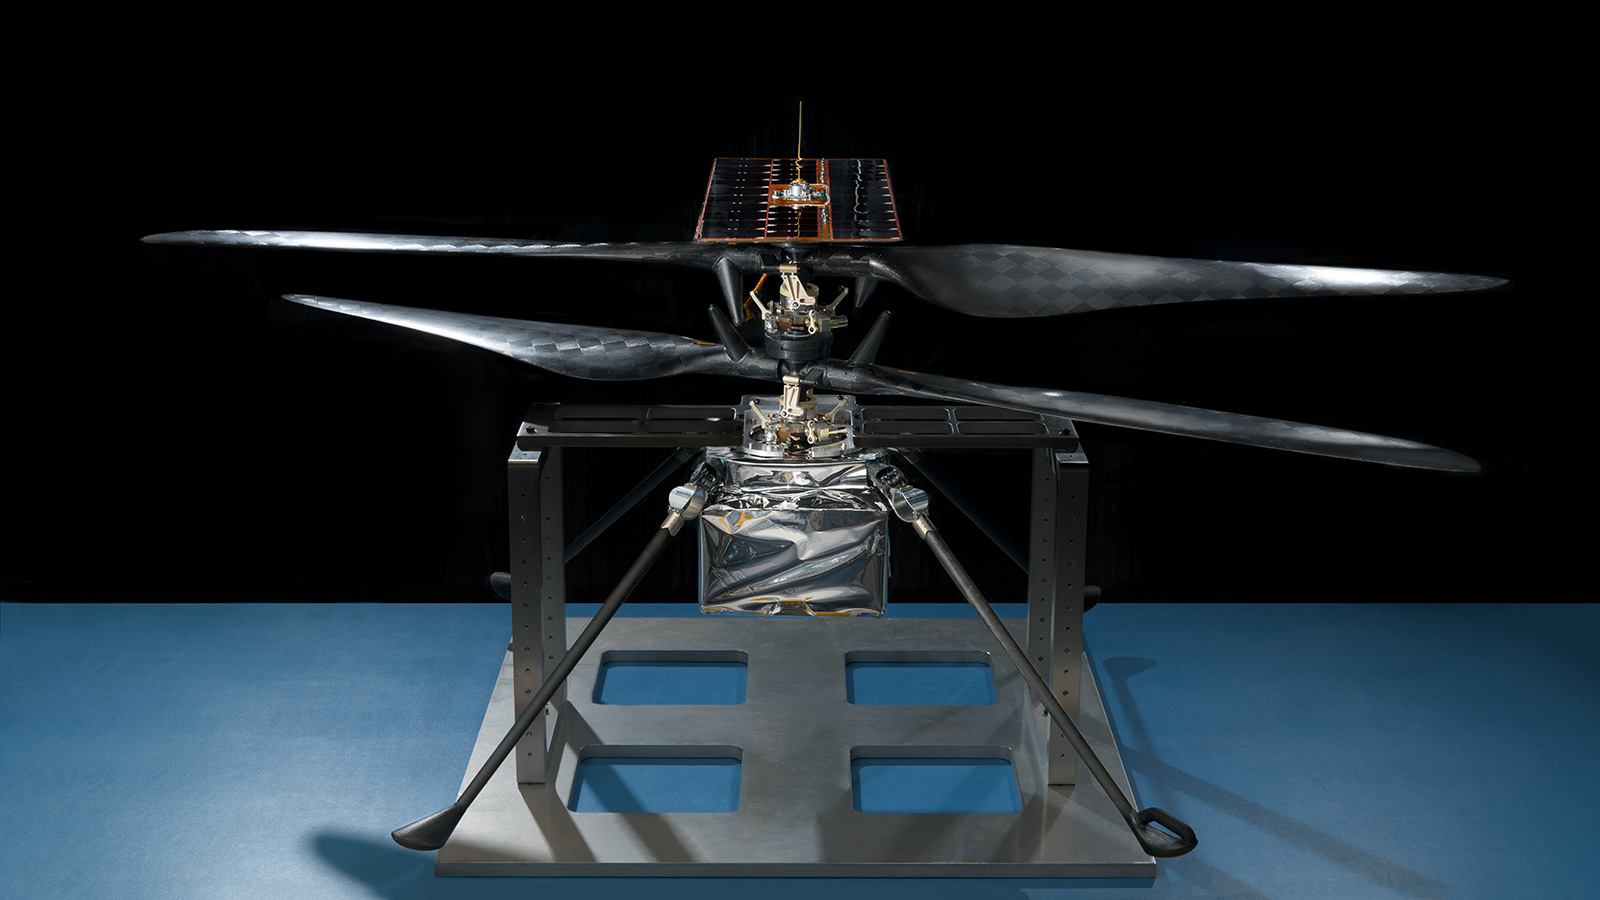 An image of the flight model of NASA’s Mars Helicopter.